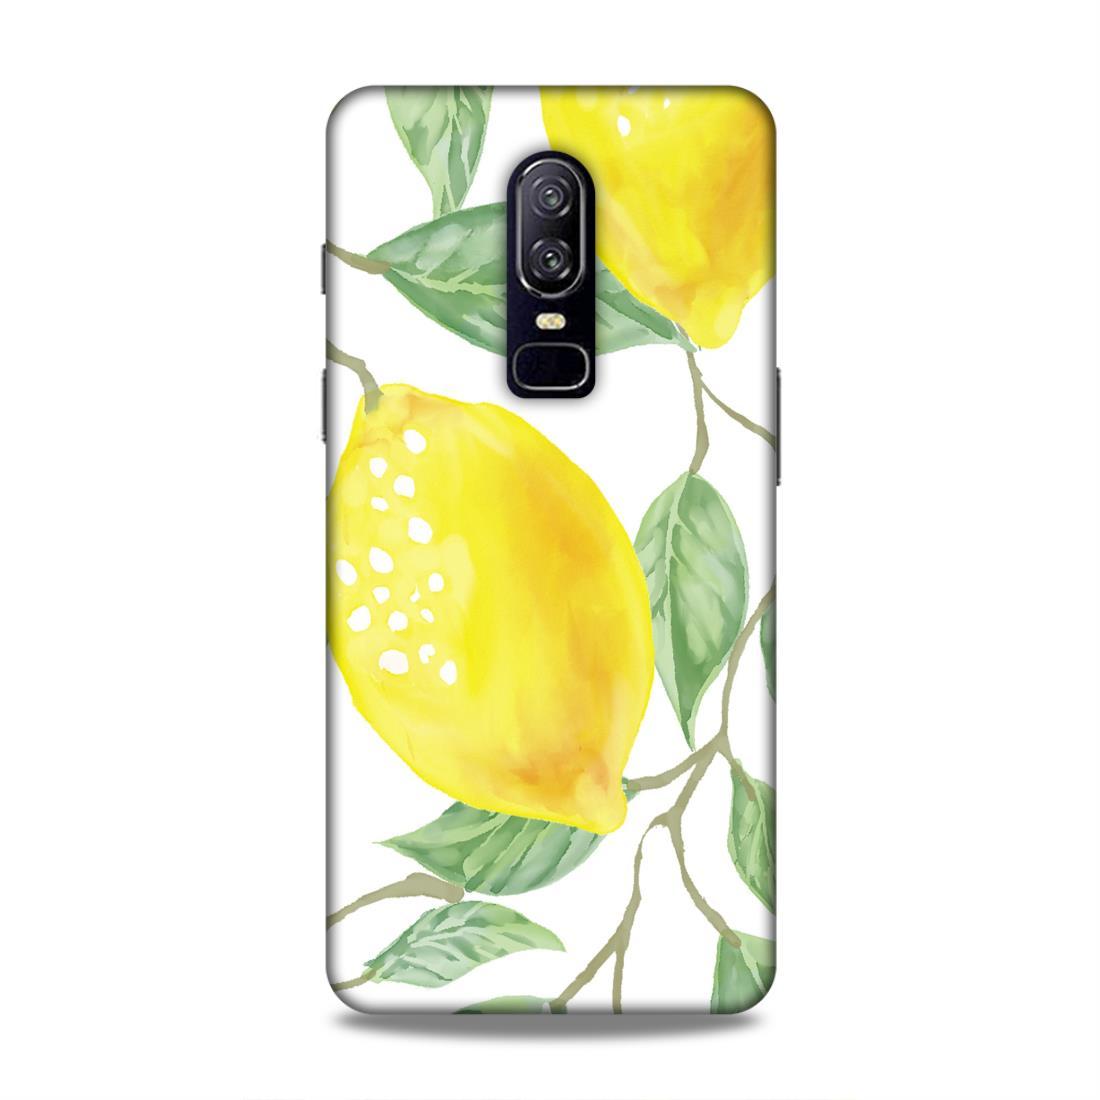 Mango Waterpainting OnePlus 6 Mobile Back Case